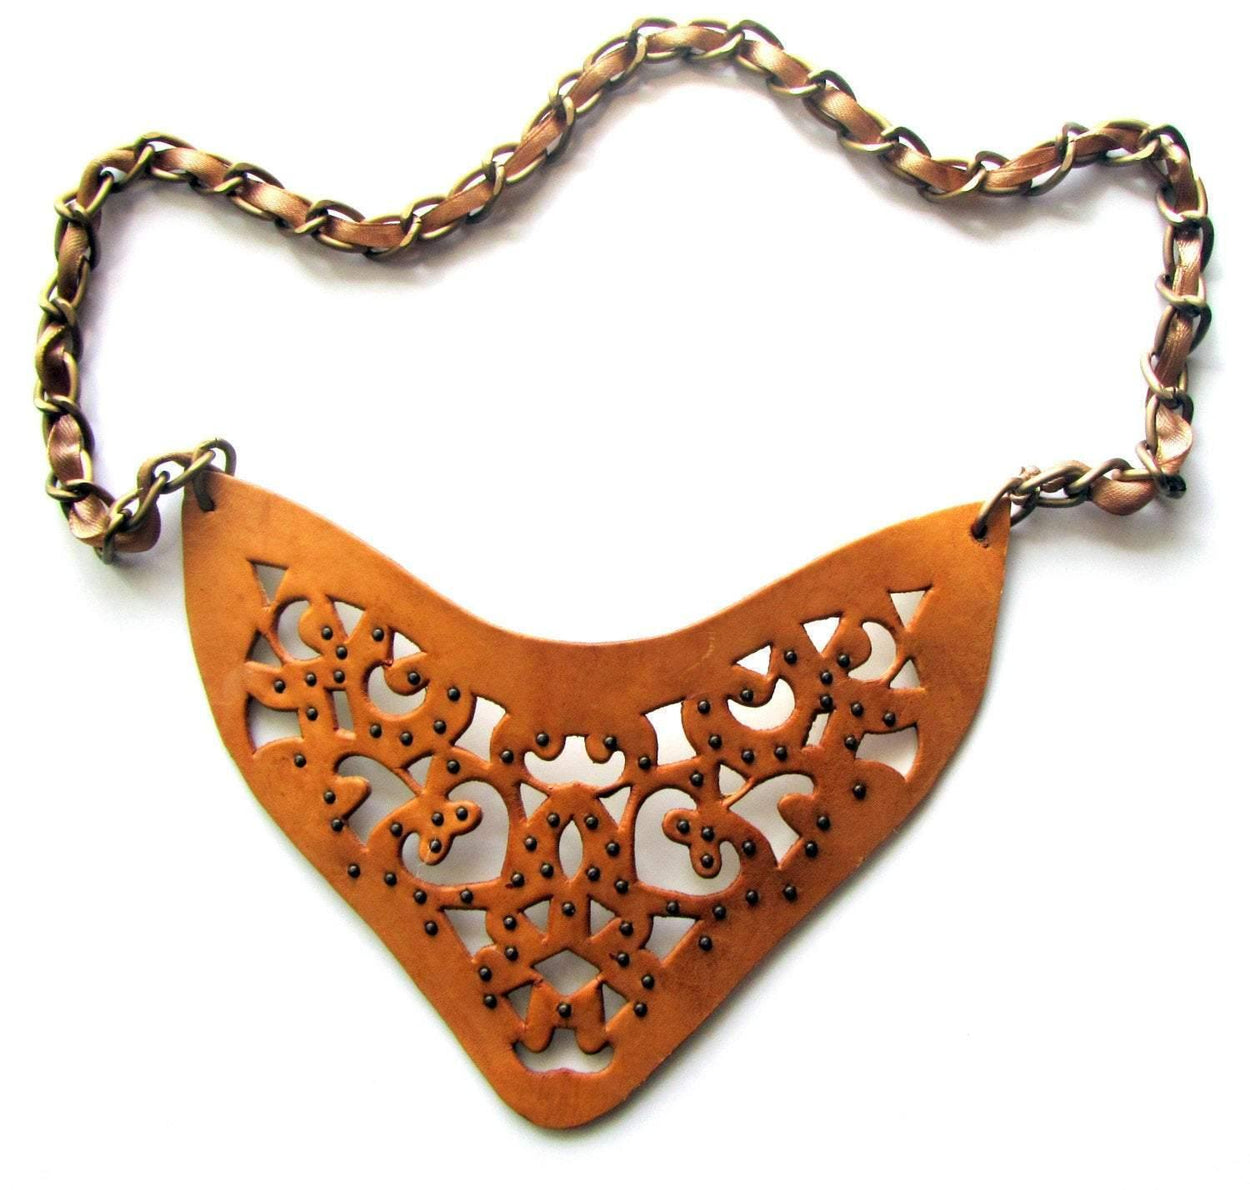 Openwork necklace of of thick leather on the large chain with a silk ribbon or cord Leather. - GLEZANT designer goods store. 